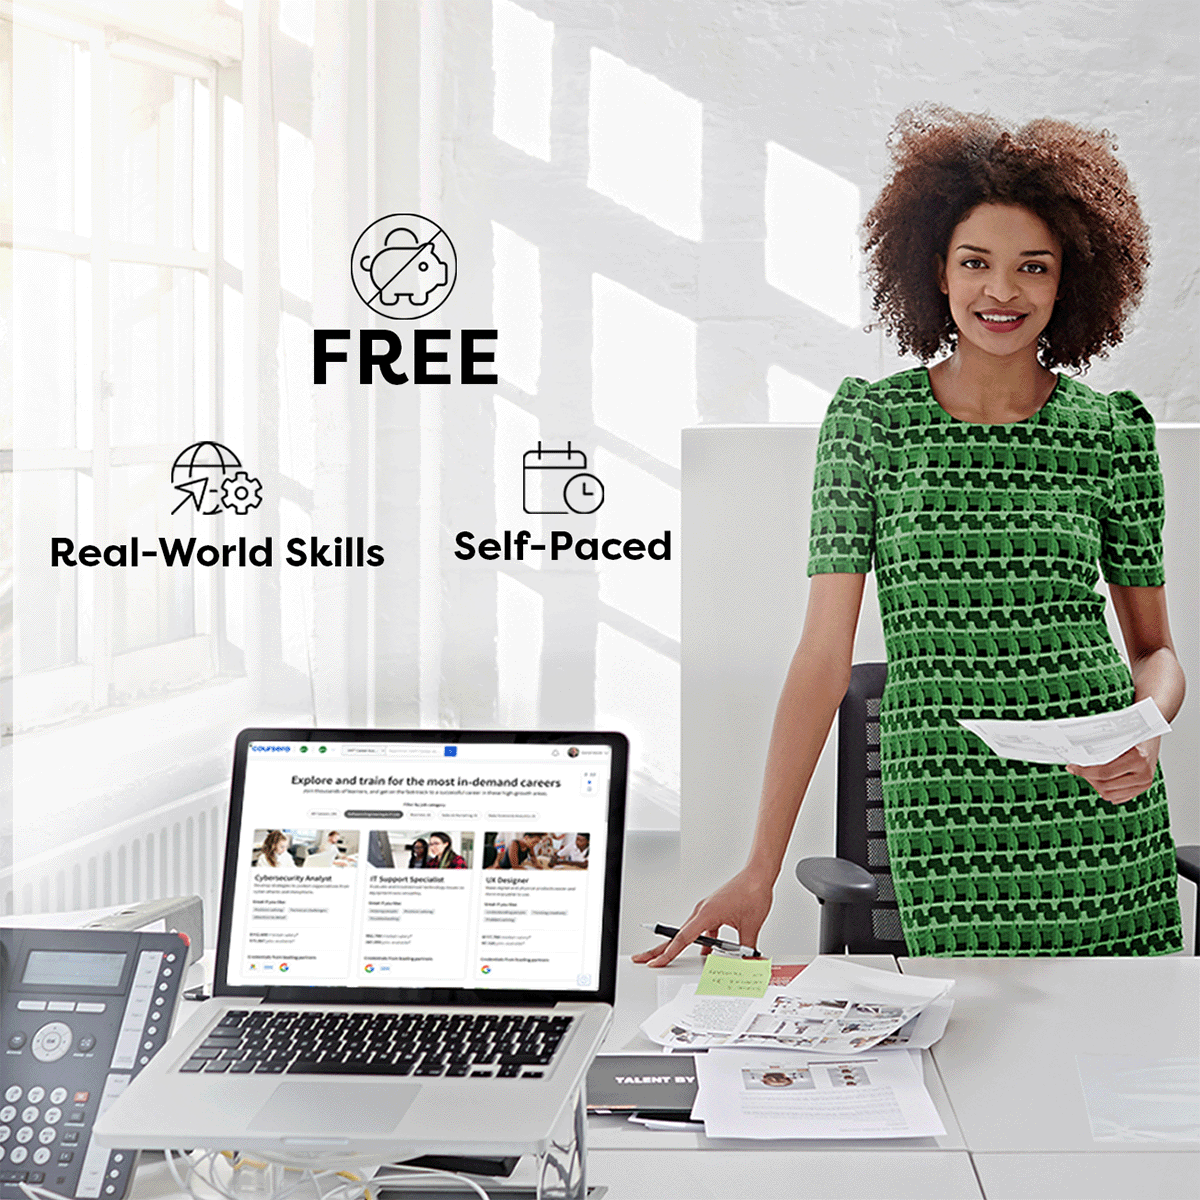 Free - Self Paced - Real World Skills